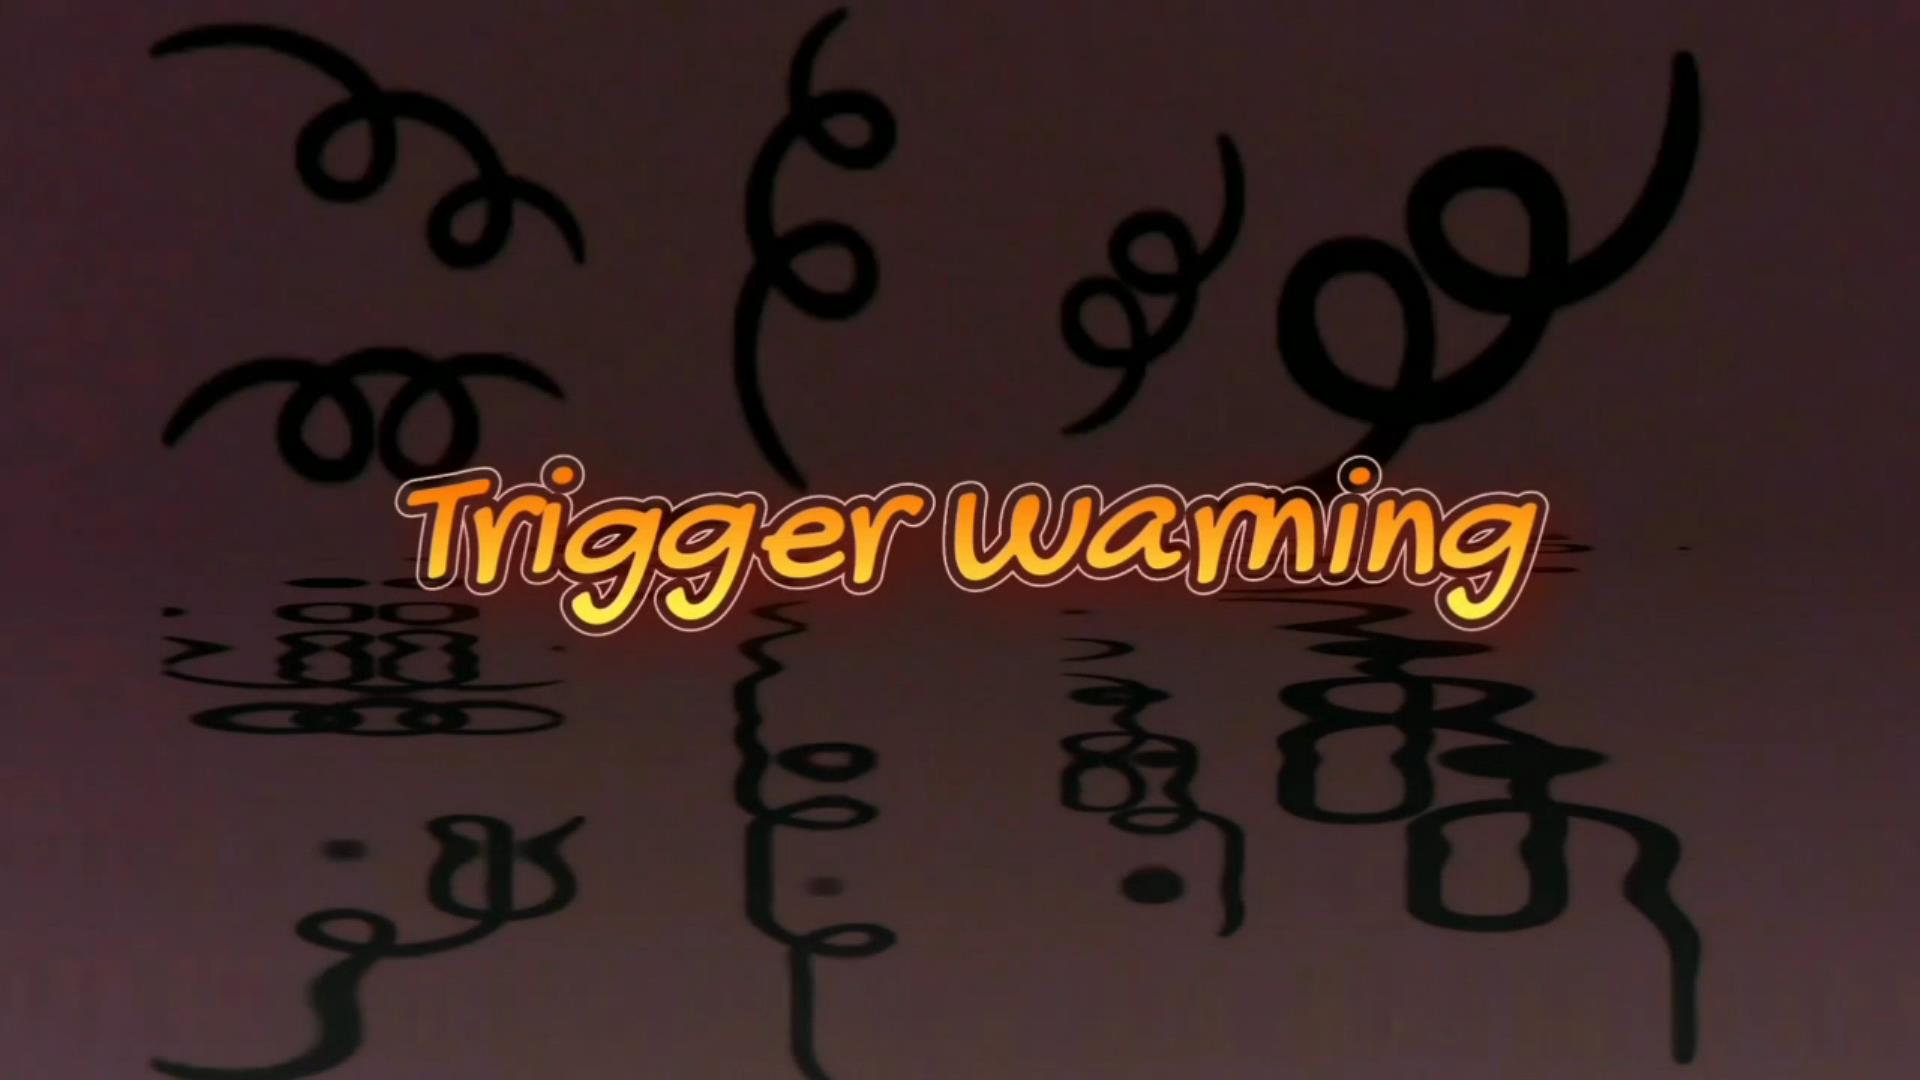 Black swirls and its reflections on a maroon background. The highlighted text in the centre reads "Trigger warning."